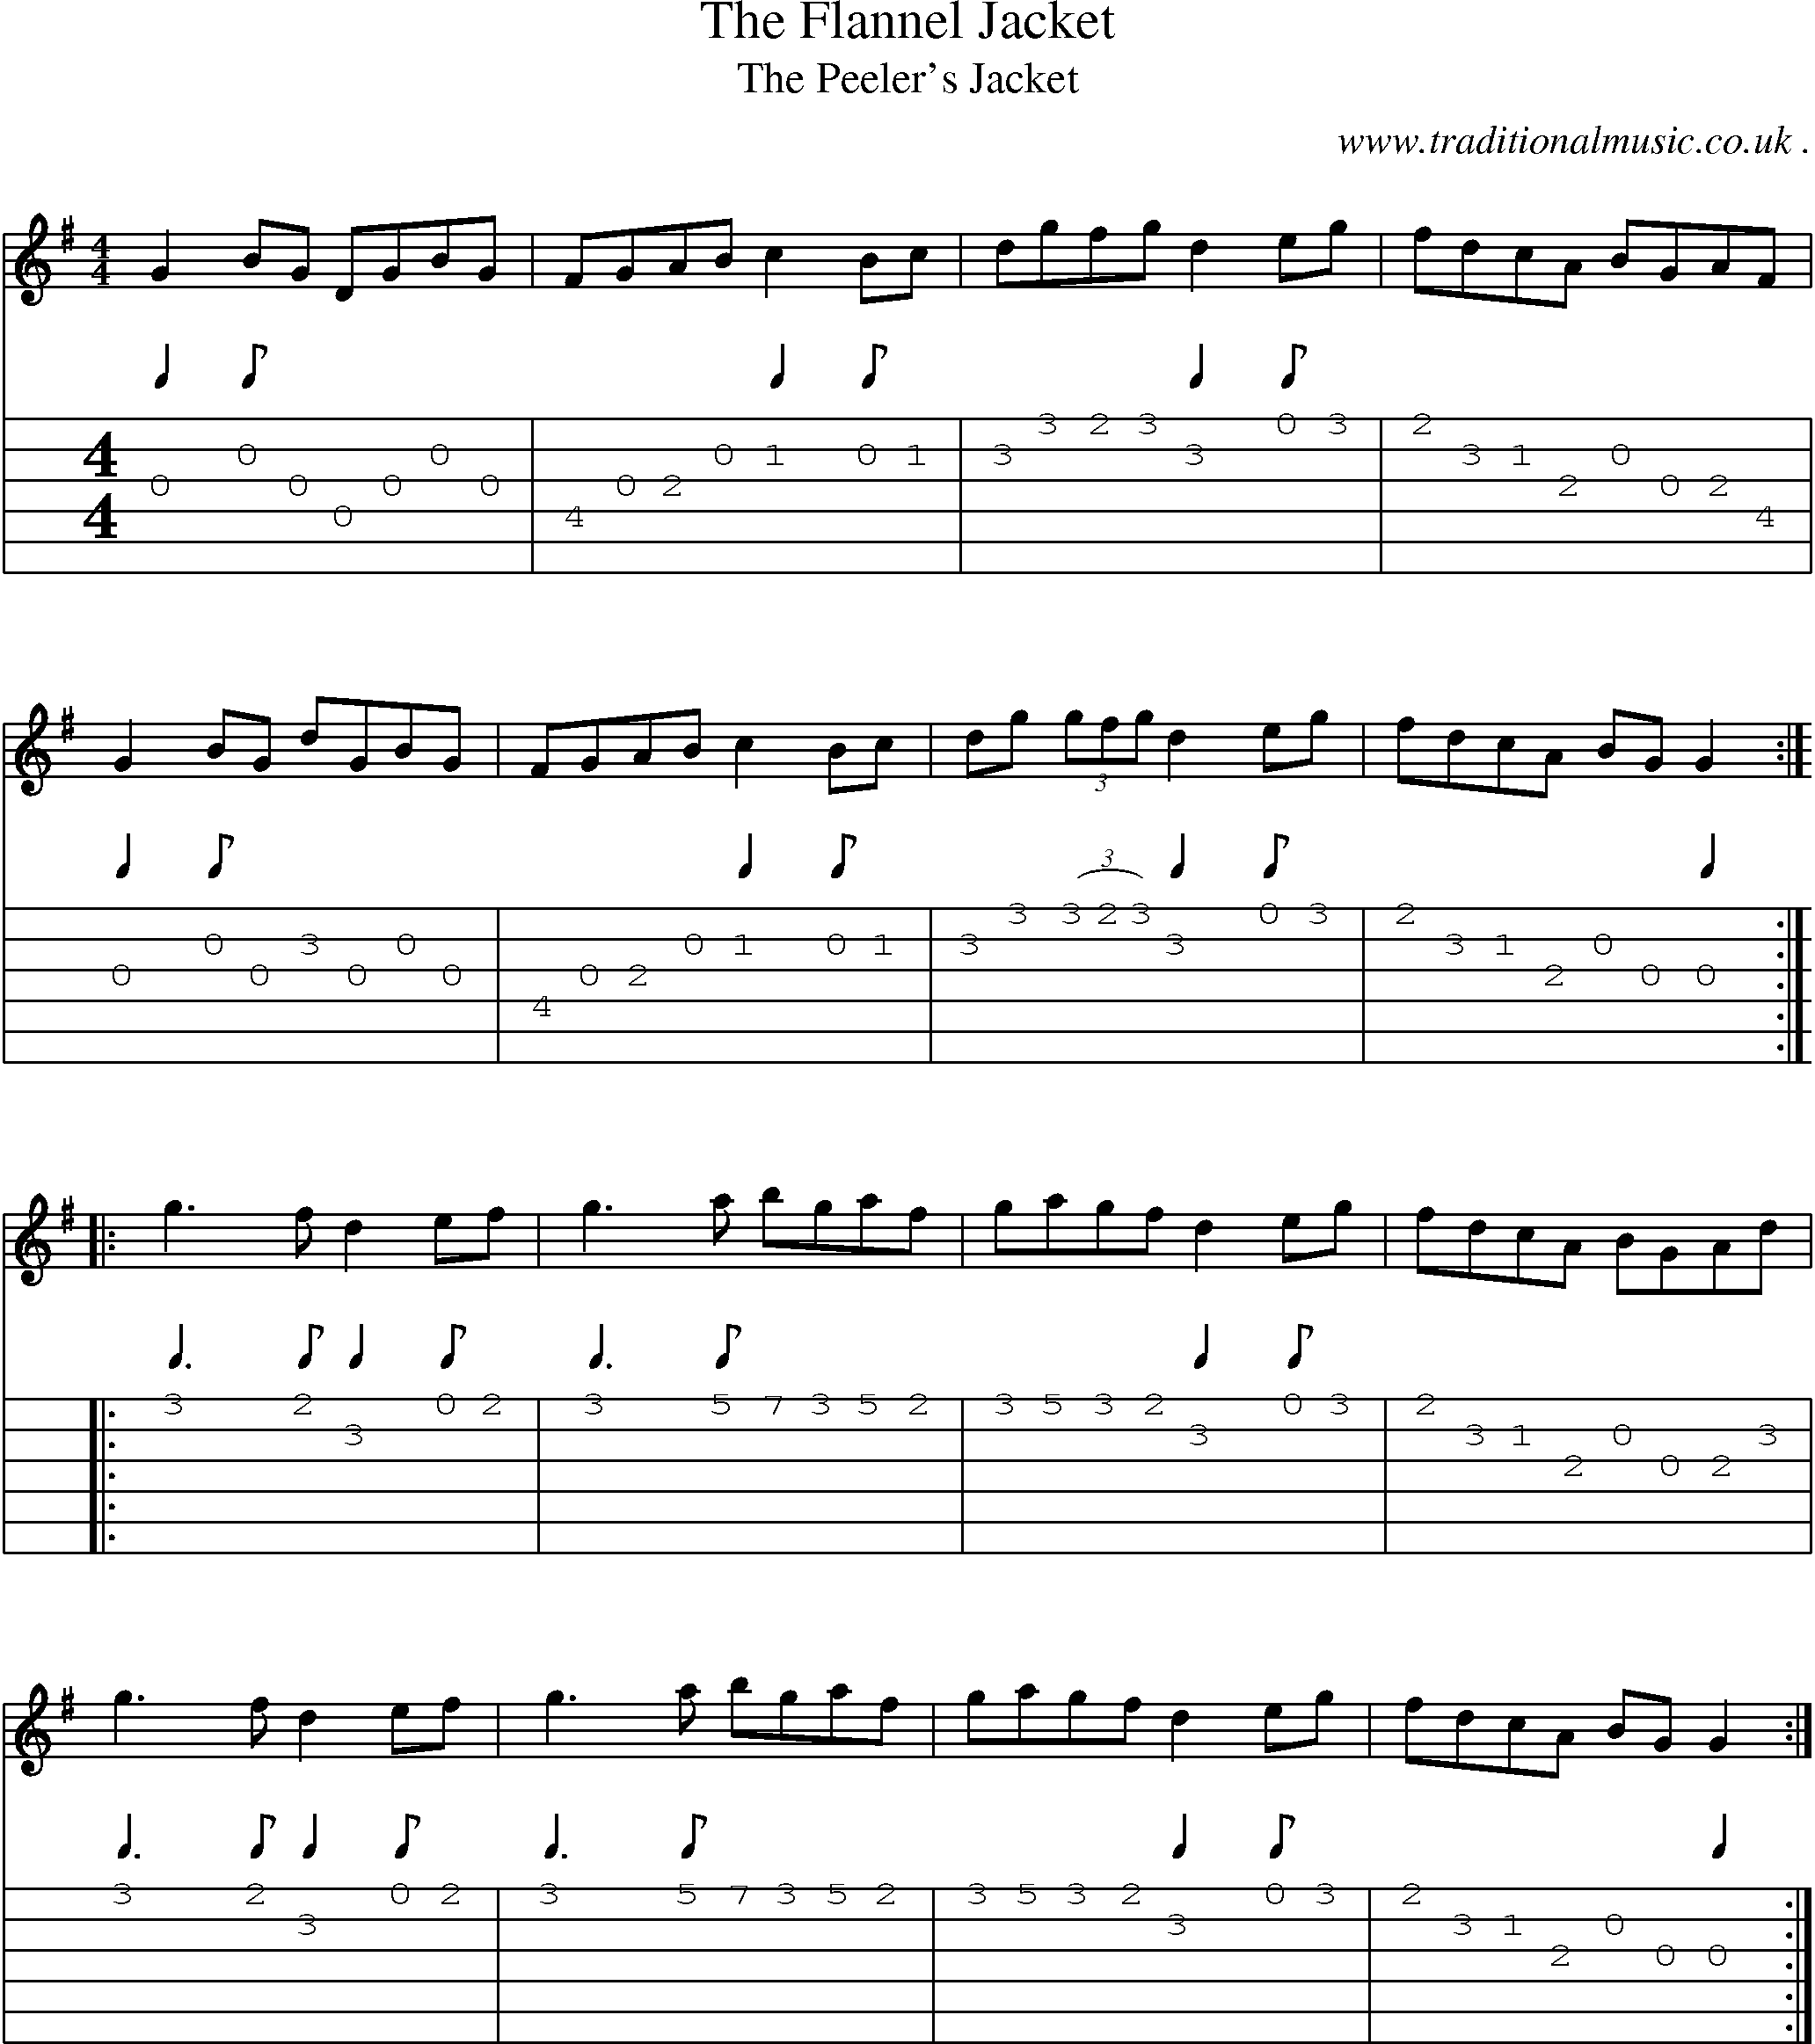 Sheet-Music and Guitar Tabs for The Flannel Jacket